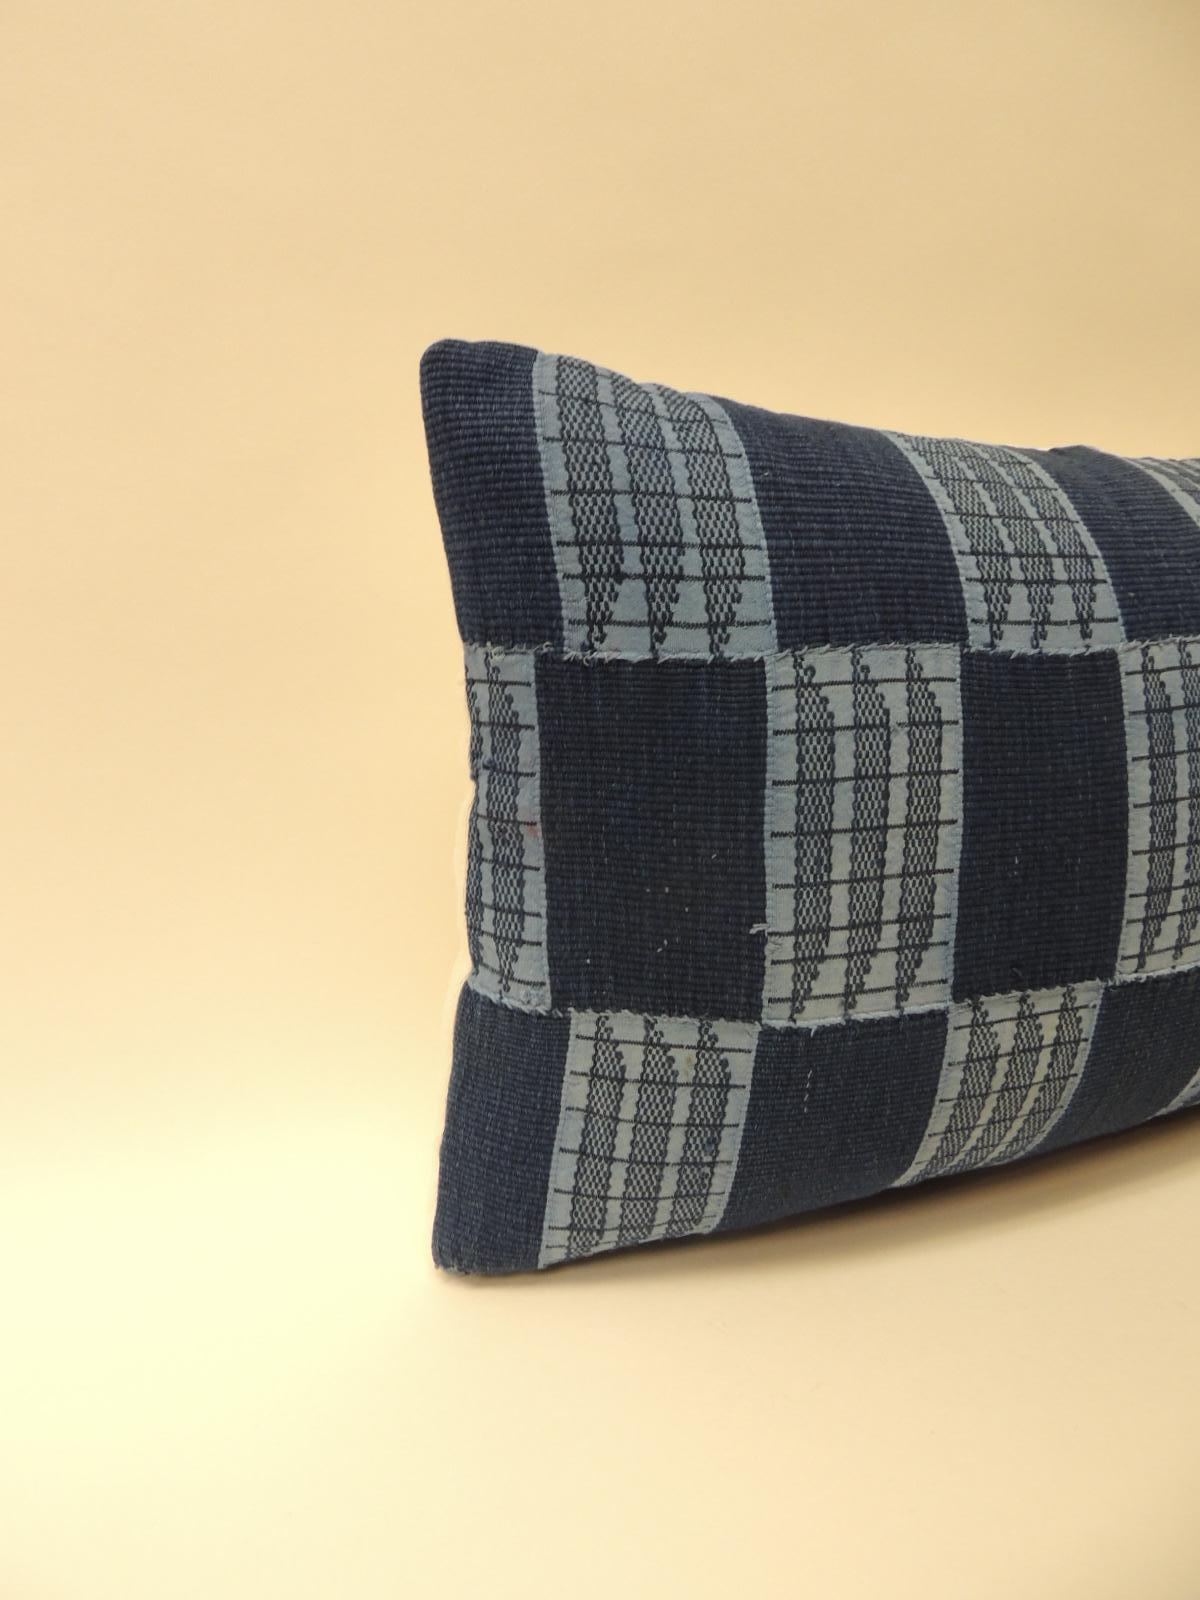 Vintage indigo and blue African woven and embroidered checkerboard pattern decorative lumbar pillow. Throw pillow handcrafted with a vintage textile from the artisanal fiber arts traditions of Africa. Decorative lumbar pillow finished with natural